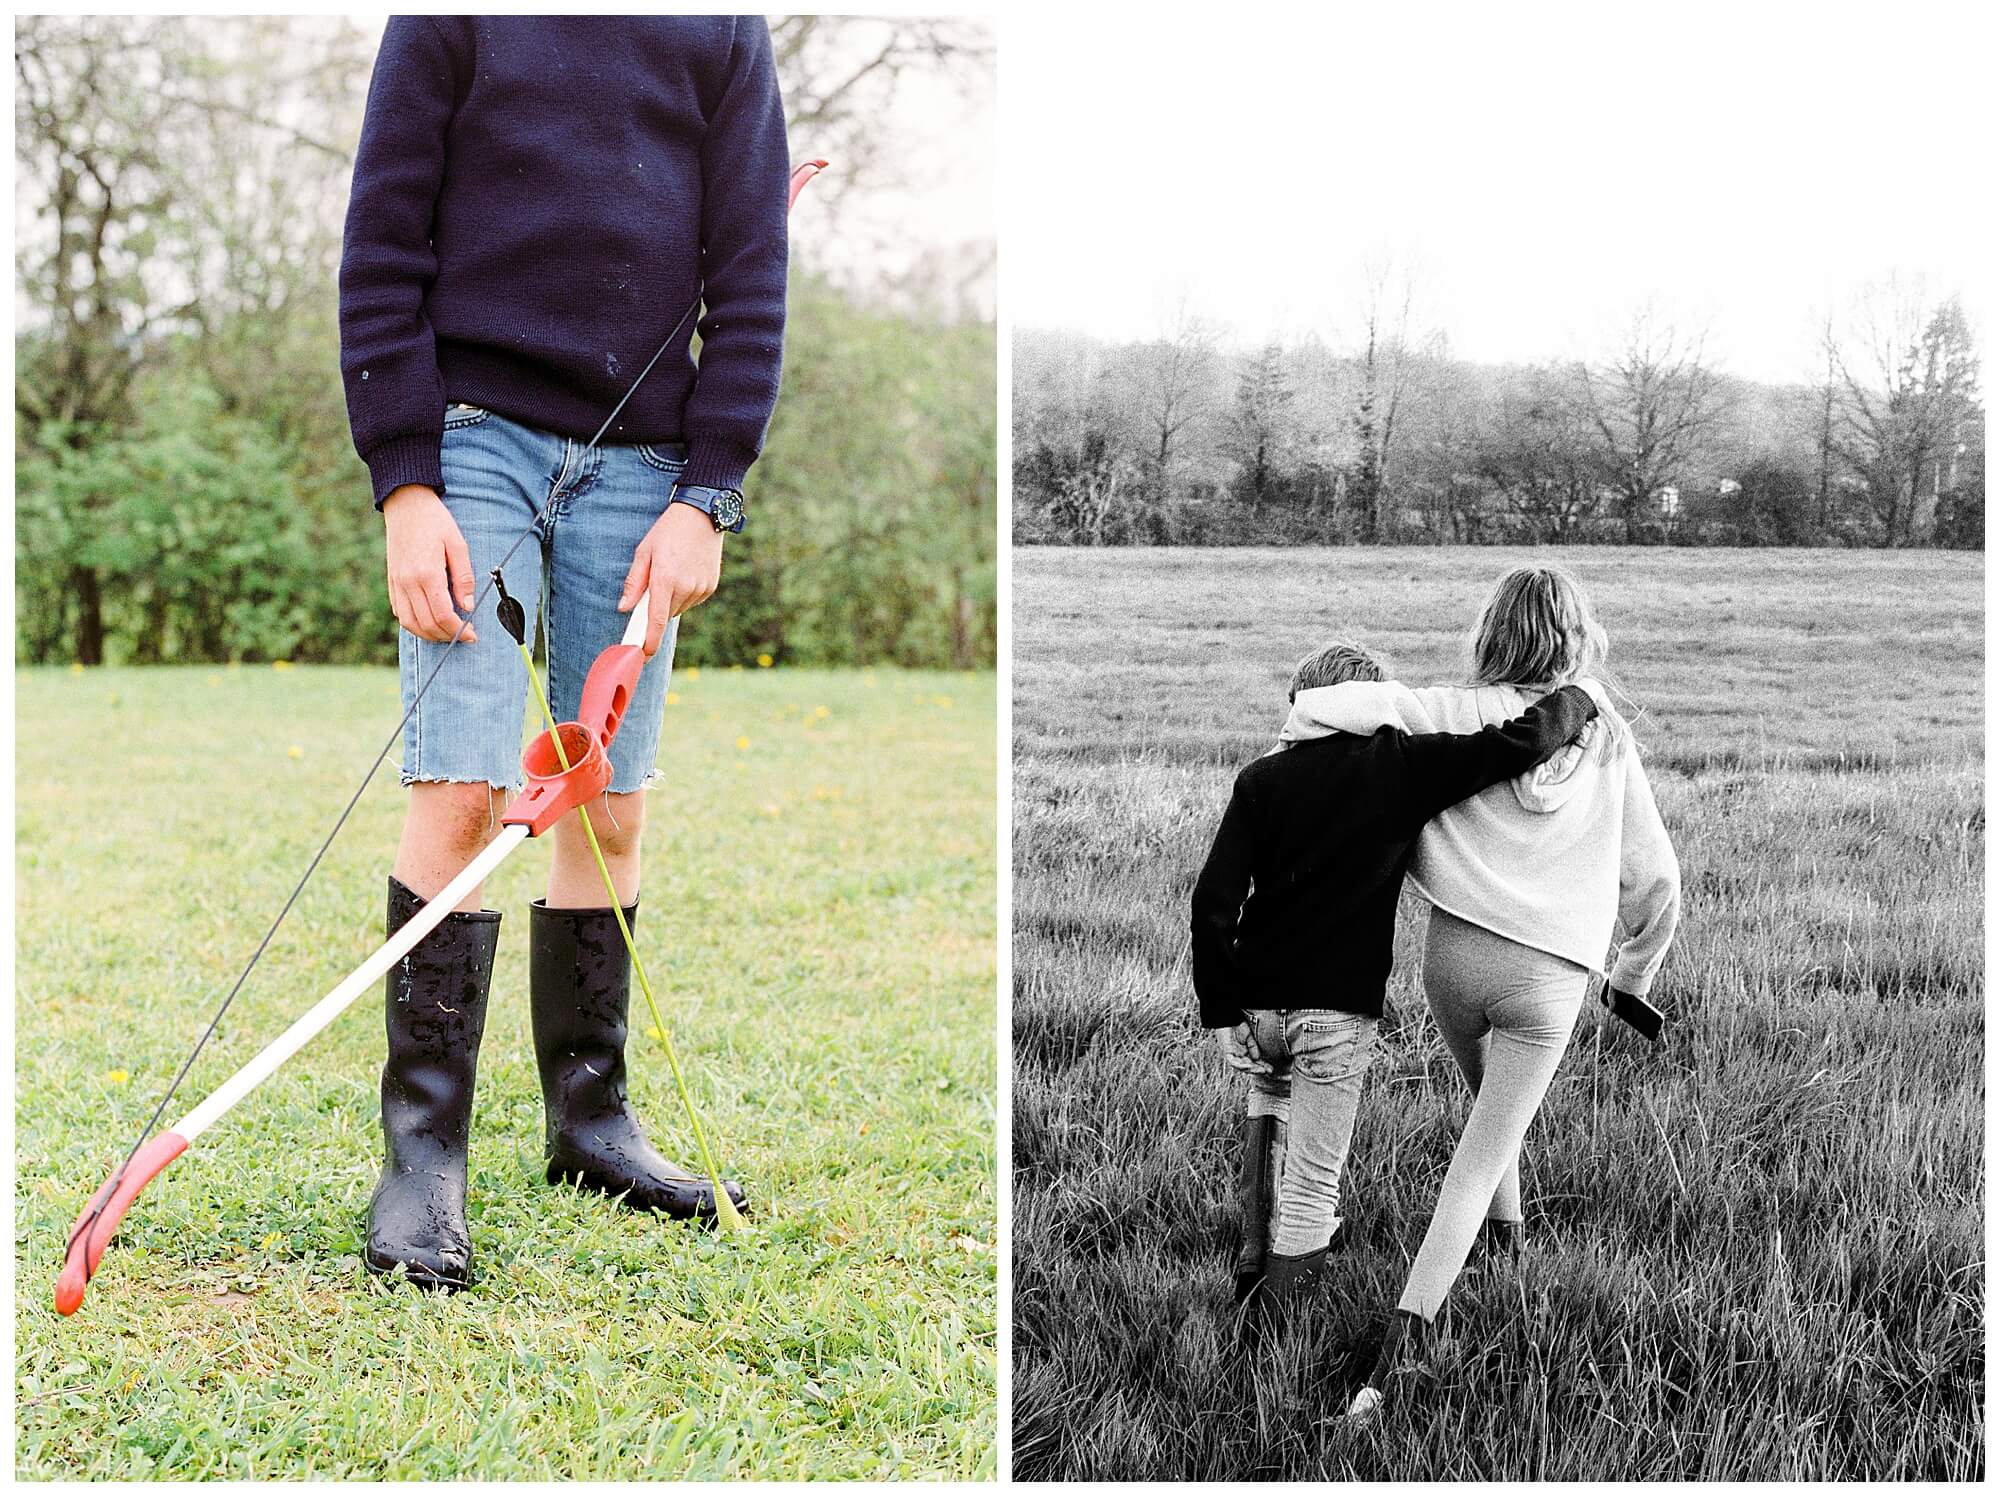 Left: A young boy holds a rubber bow and arrow set. Right: Two siblings tromp through an overgrown field with their arms slung over each other's shoulders.